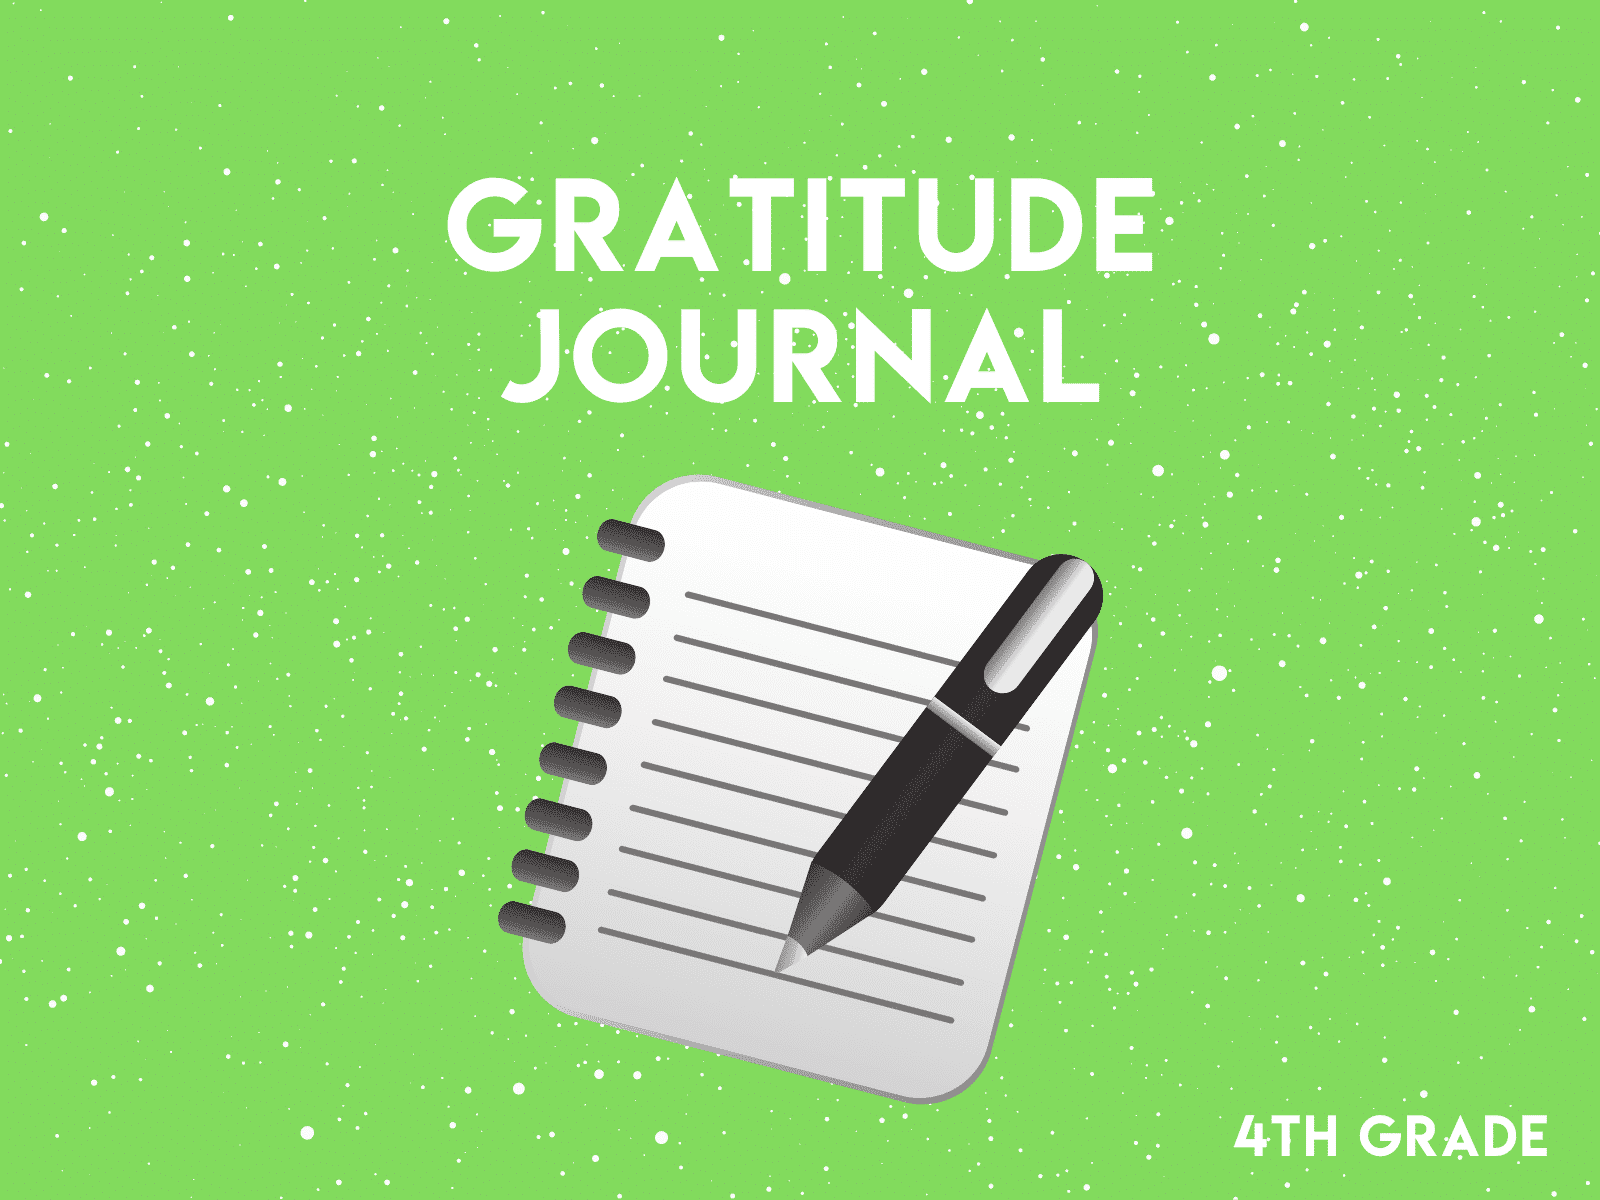 Practice fourth grade writing and thankfulness with this free gratitude journal.